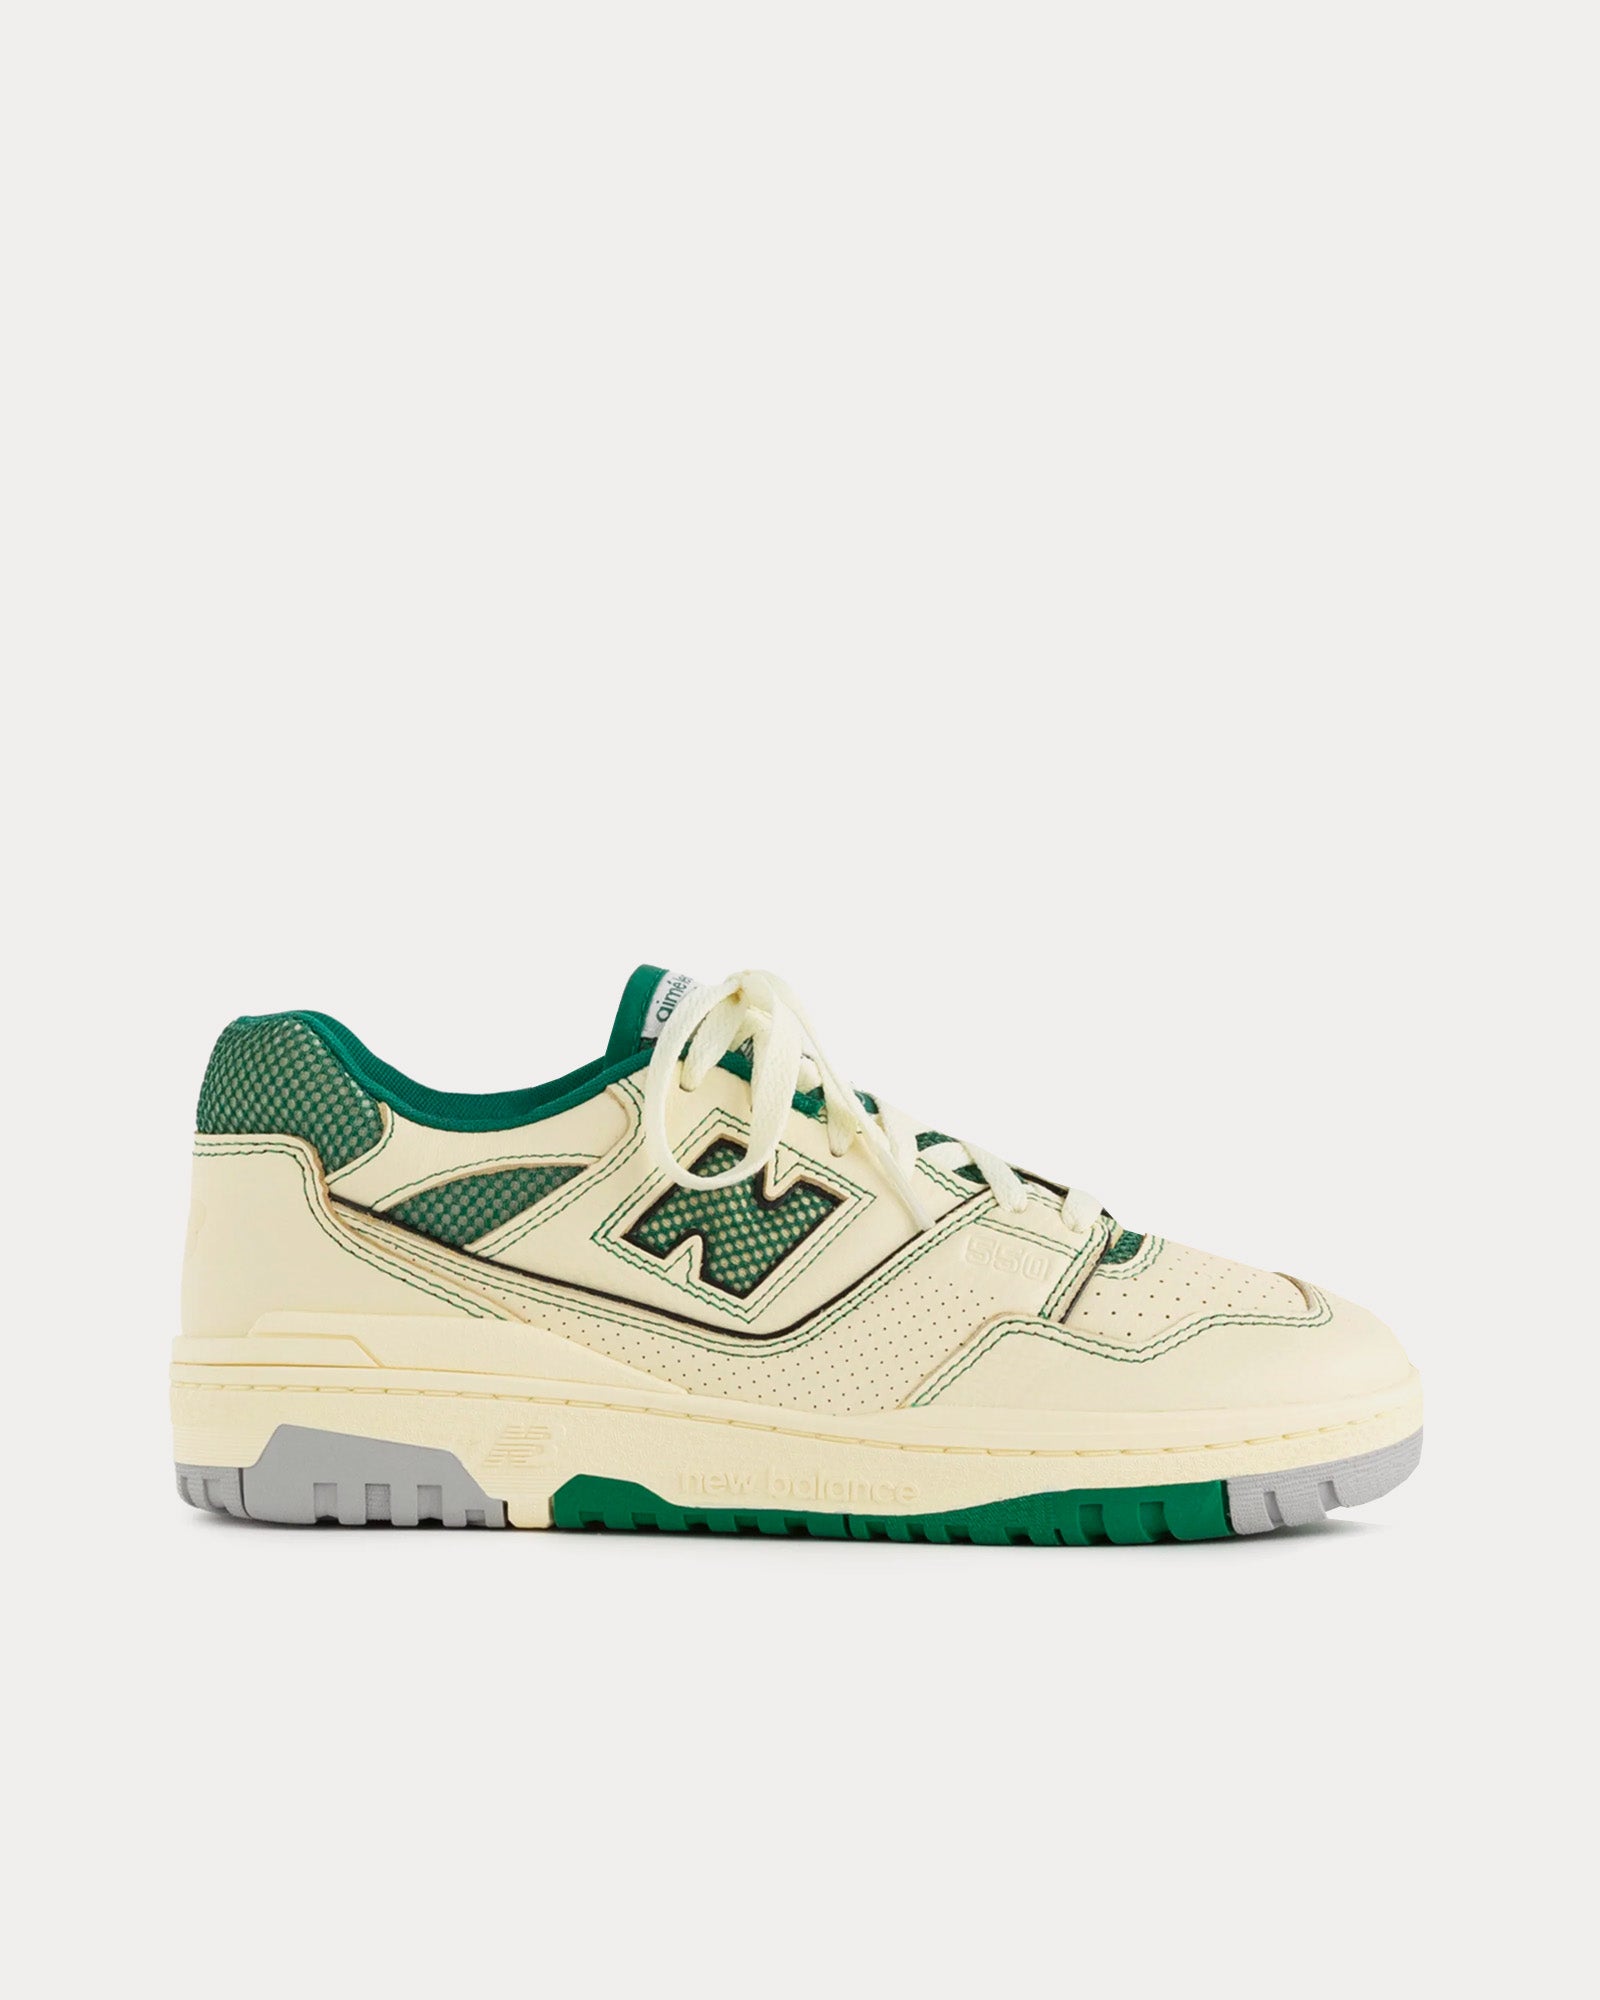 New Balance x Aime Leon Dore - P550 Basketball Oxfords Yellow / Green Low Top Sneakers